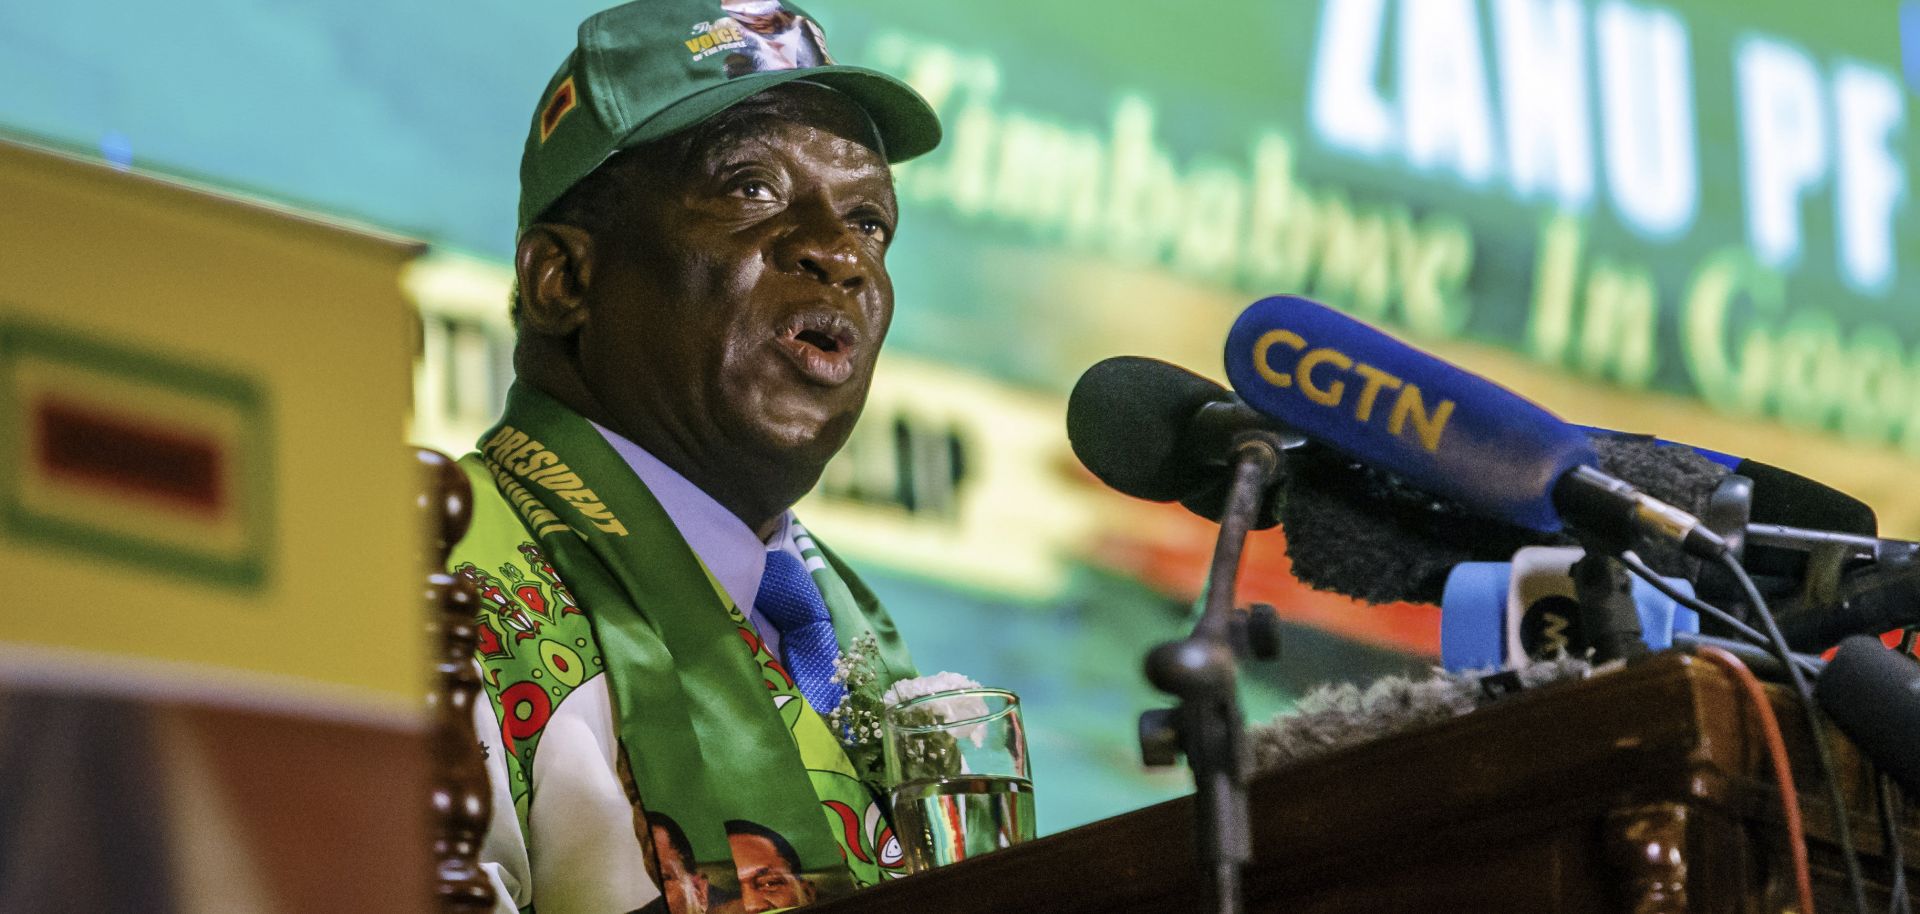 Zimbabwe's President Emmerson Mnangagwa attends the official launch of his ruling Zimbabwe African National Union Patriotic Front (ZANU-PF) party manifesto for the upcoming general elections. The first general elections since the ouster of longtime ruler Robert Mugabe are quickly approaching.